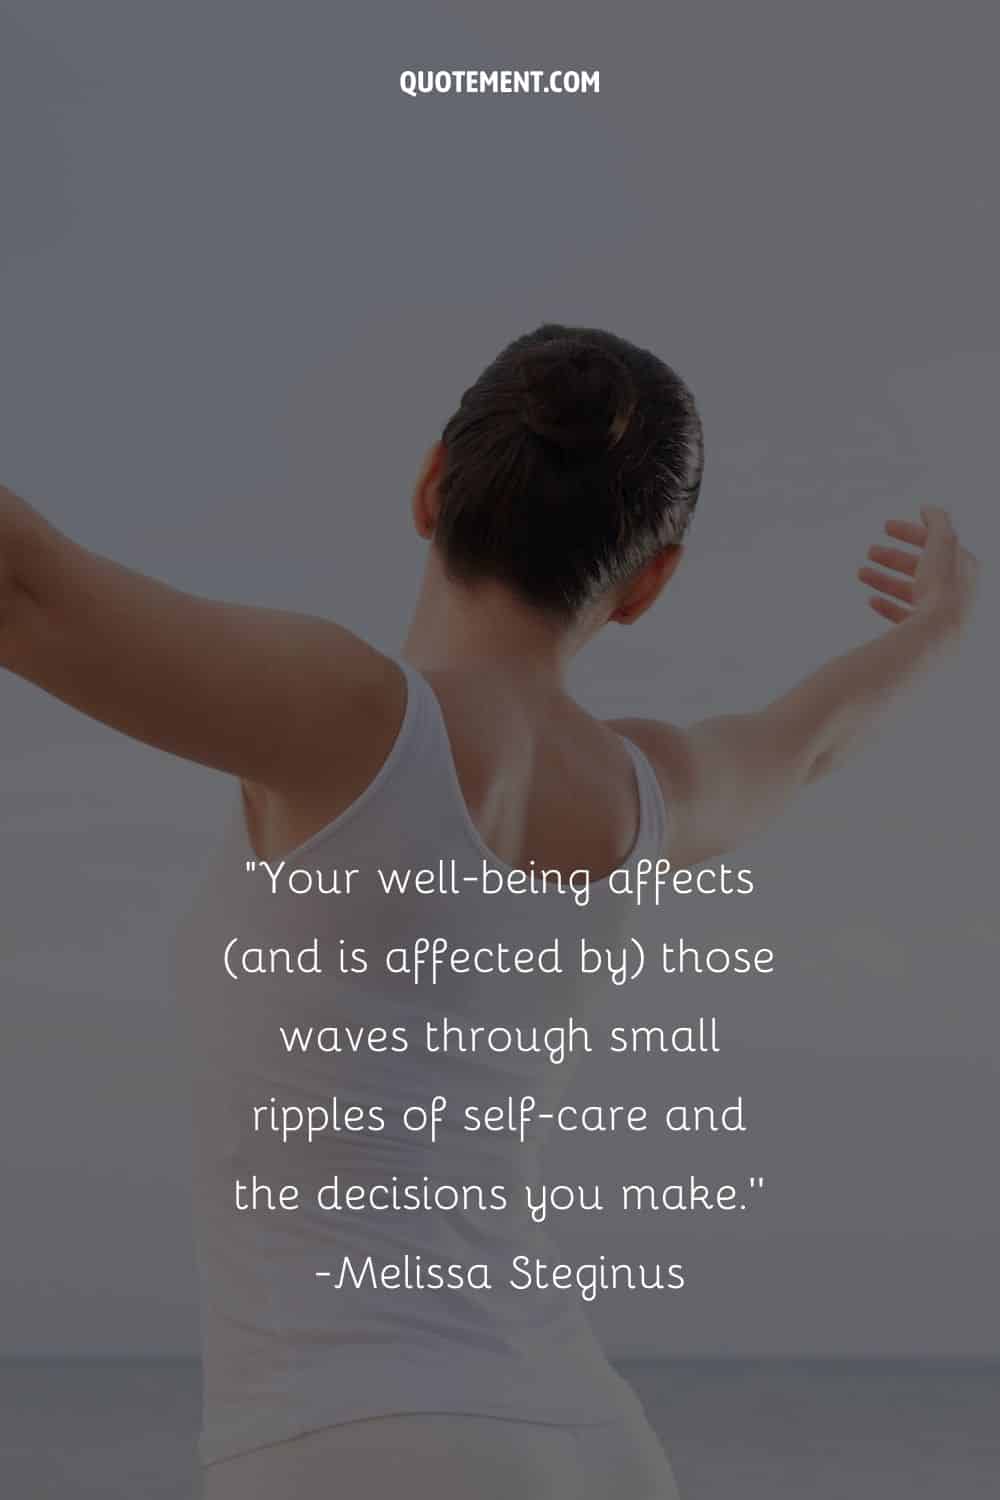 Your well-being affects (and is affected by) those waves through small ripples of self-care and the decisions you make